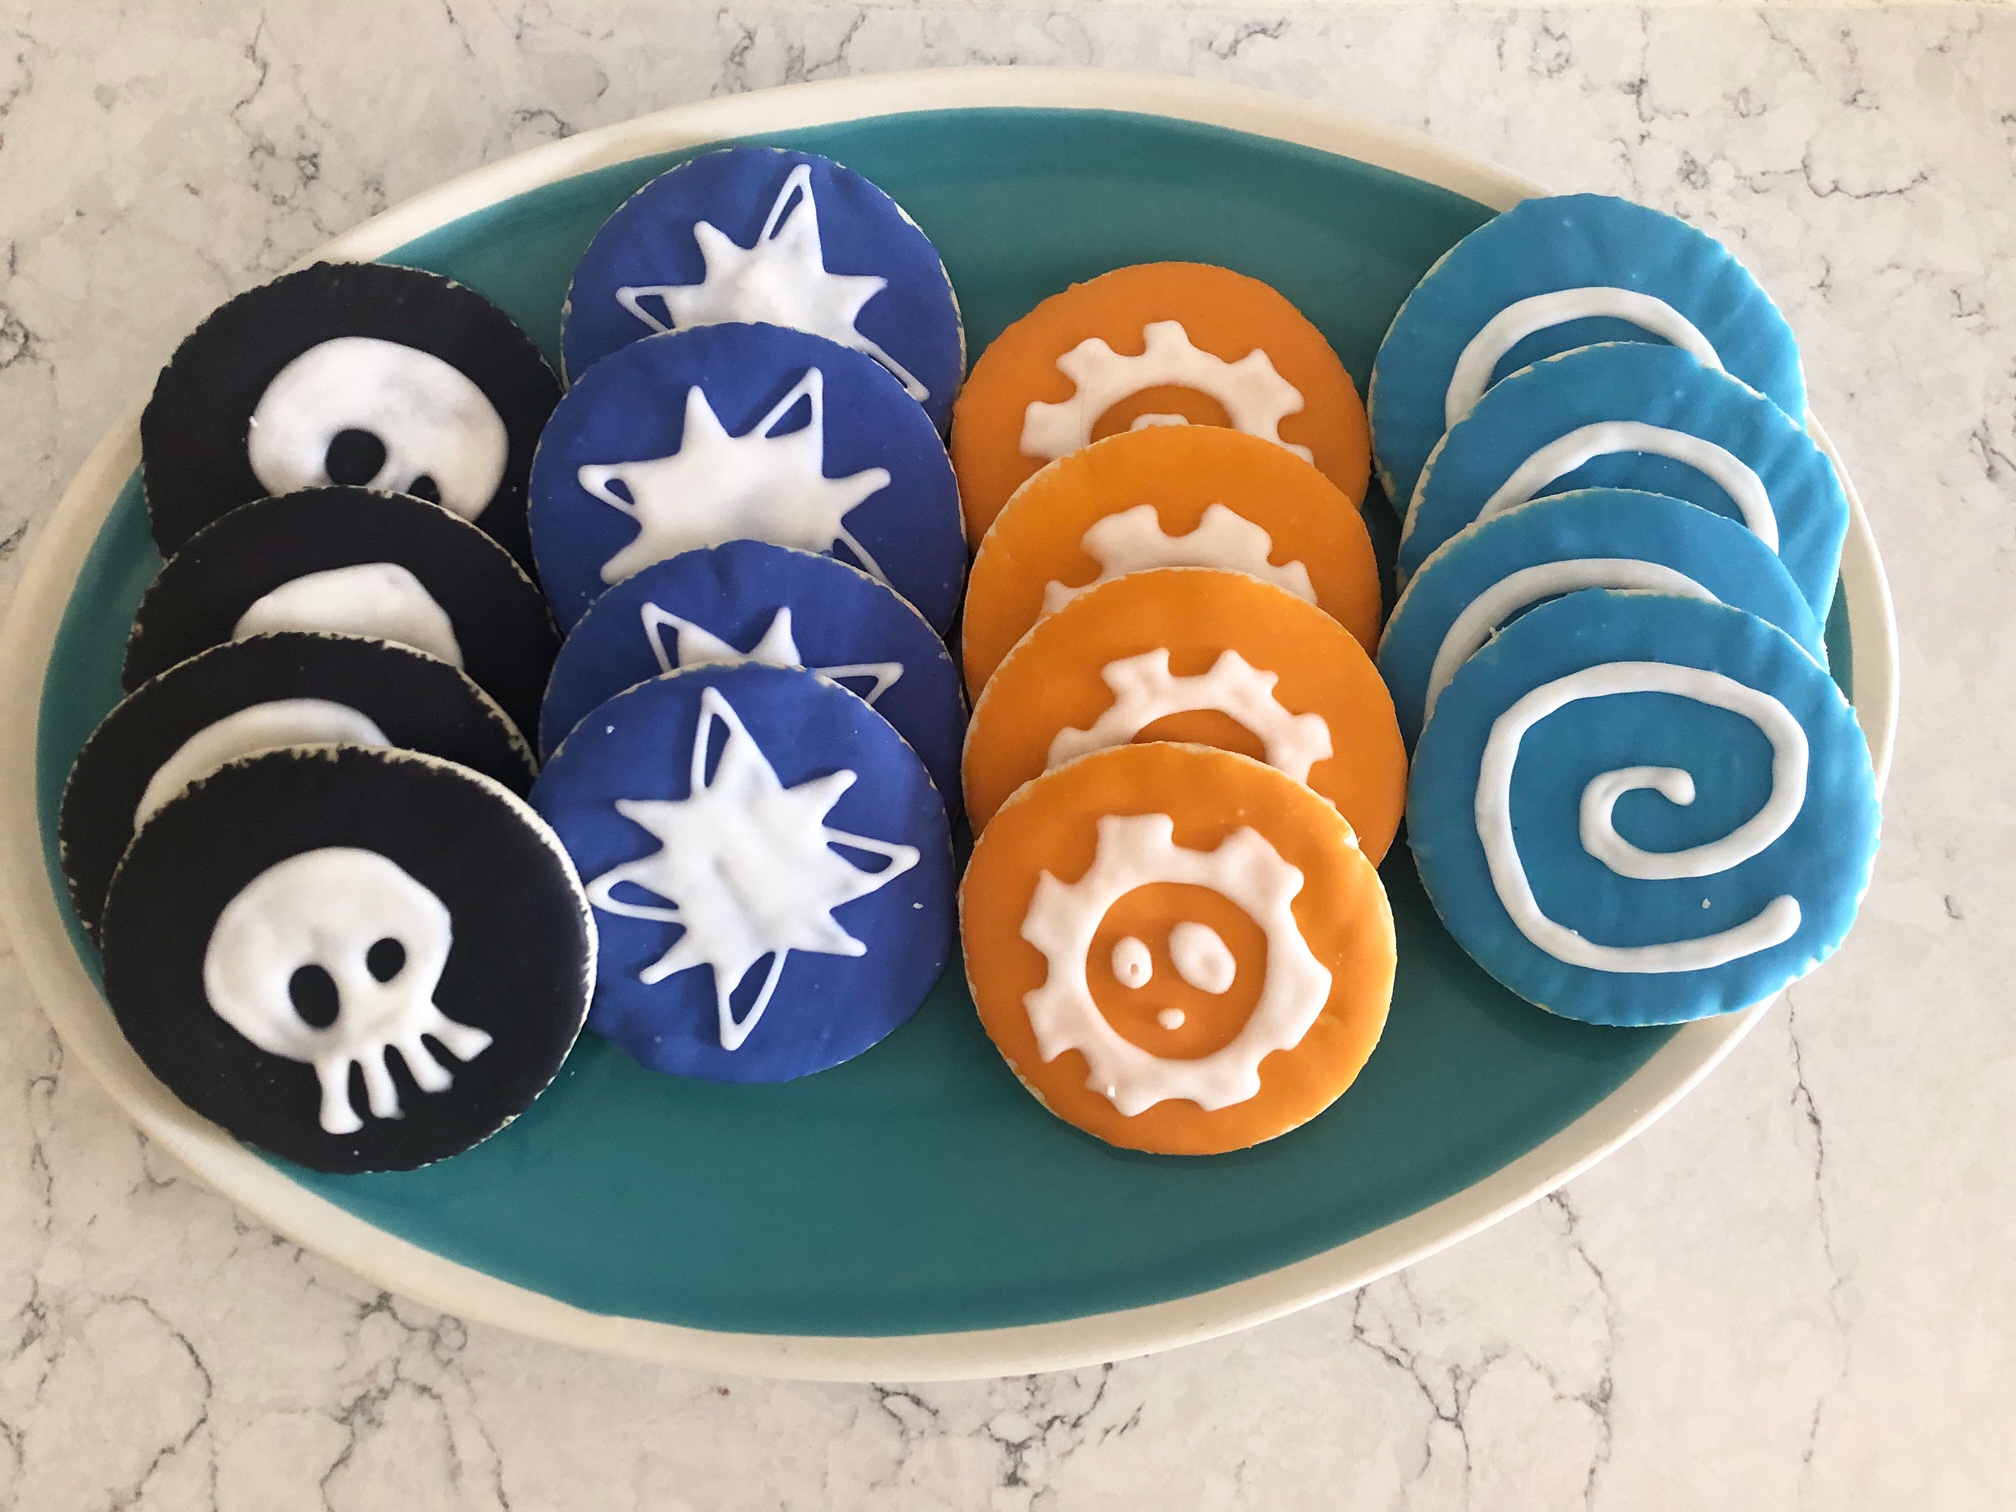 On a teal plate, there are sixteen cookies. Four black with a skull, four purple with a star, four orange with a gear, and four blue with a swirl. Photo by Alyssa Buckley.